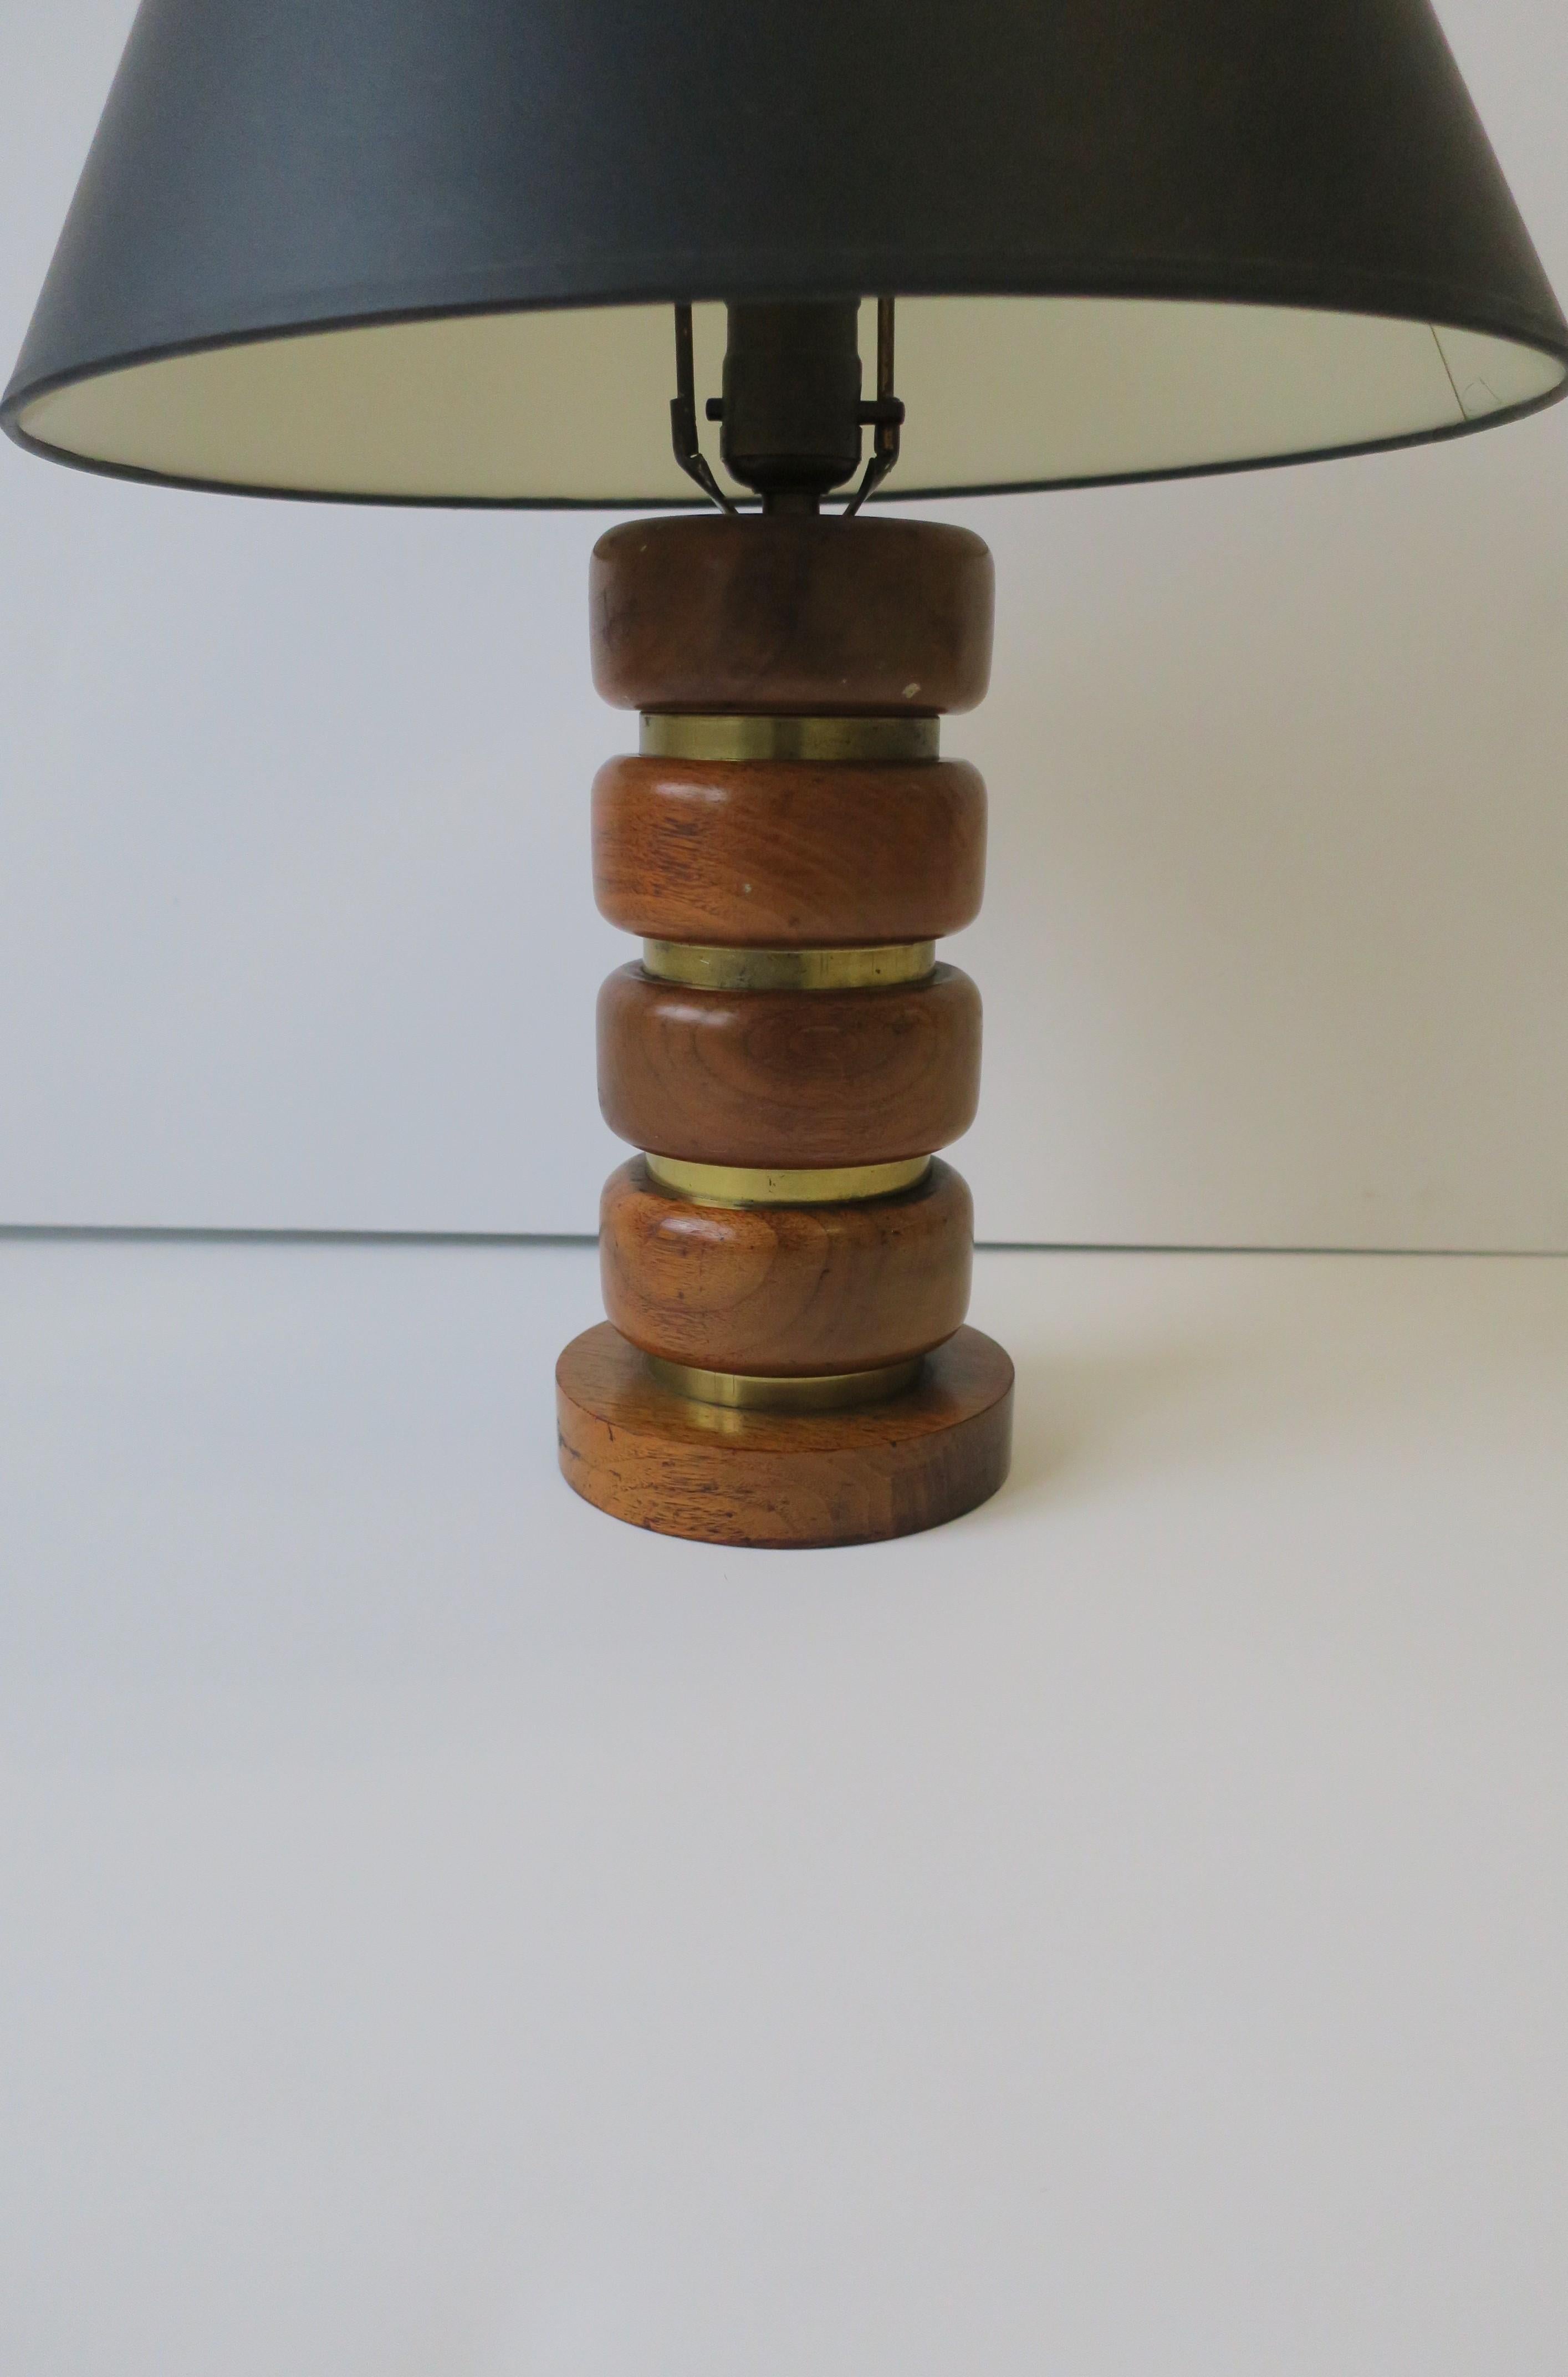 Midcentury Modern Walnut Wood and Brass Desk or Table Lamp For Sale 3